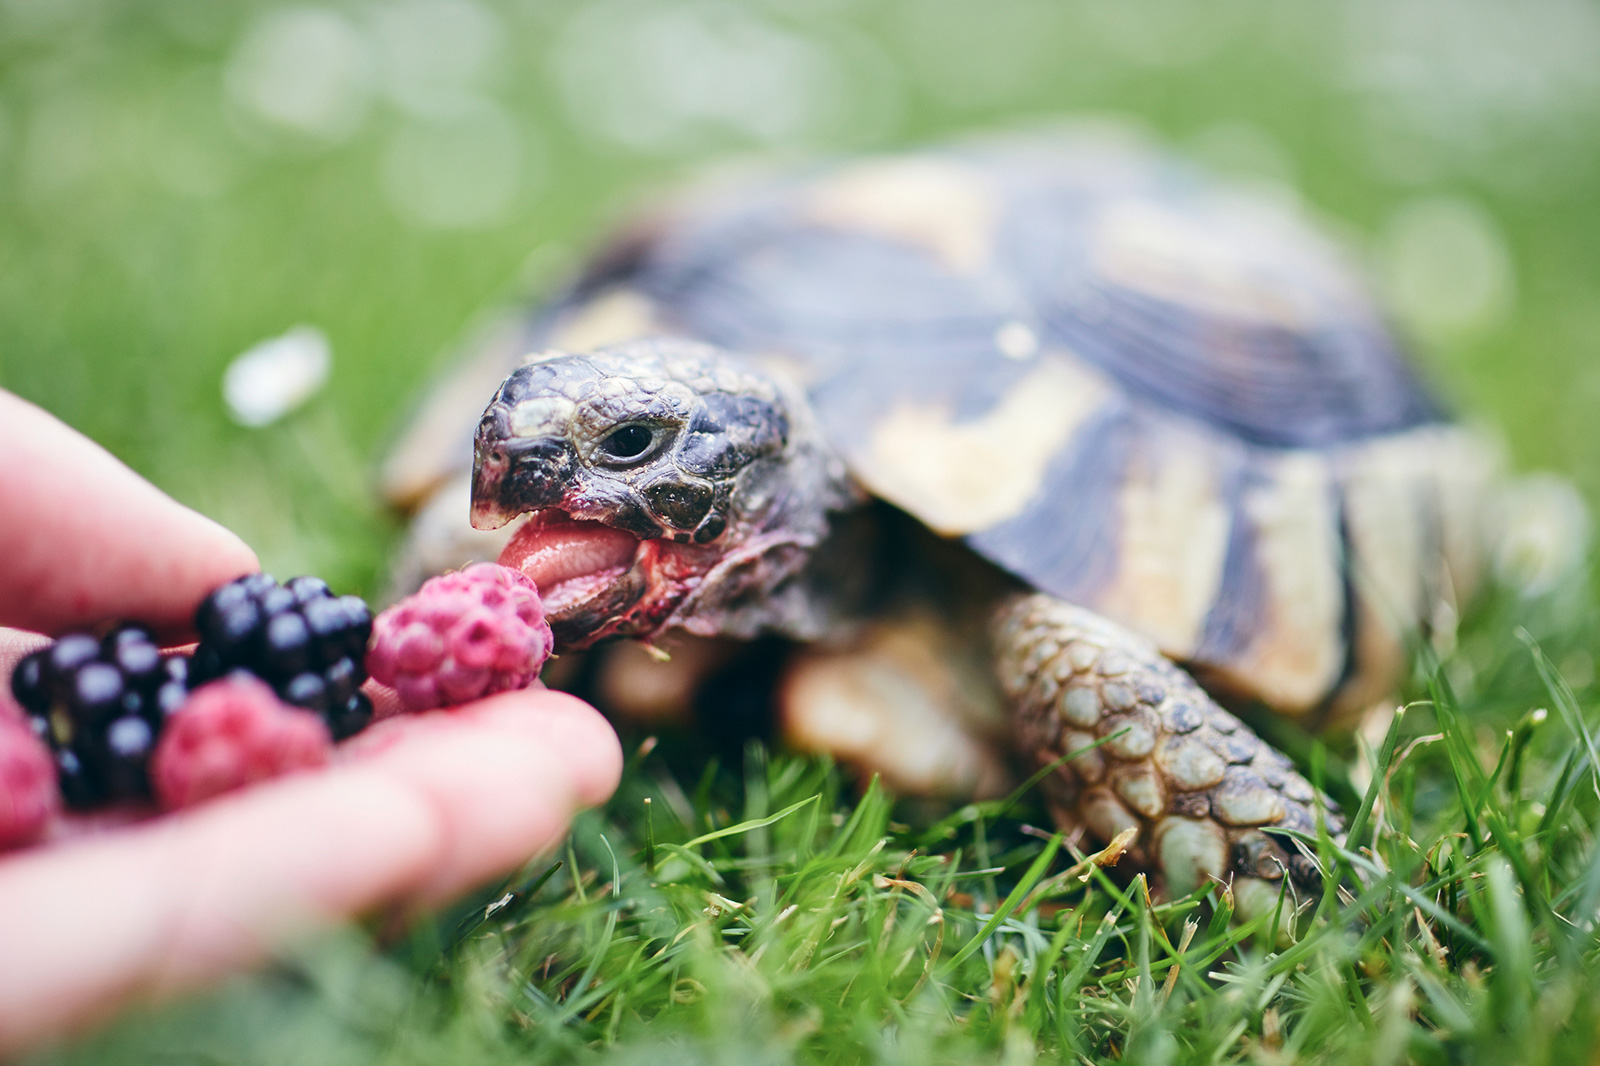 Can box turtles eat chicken eggs?